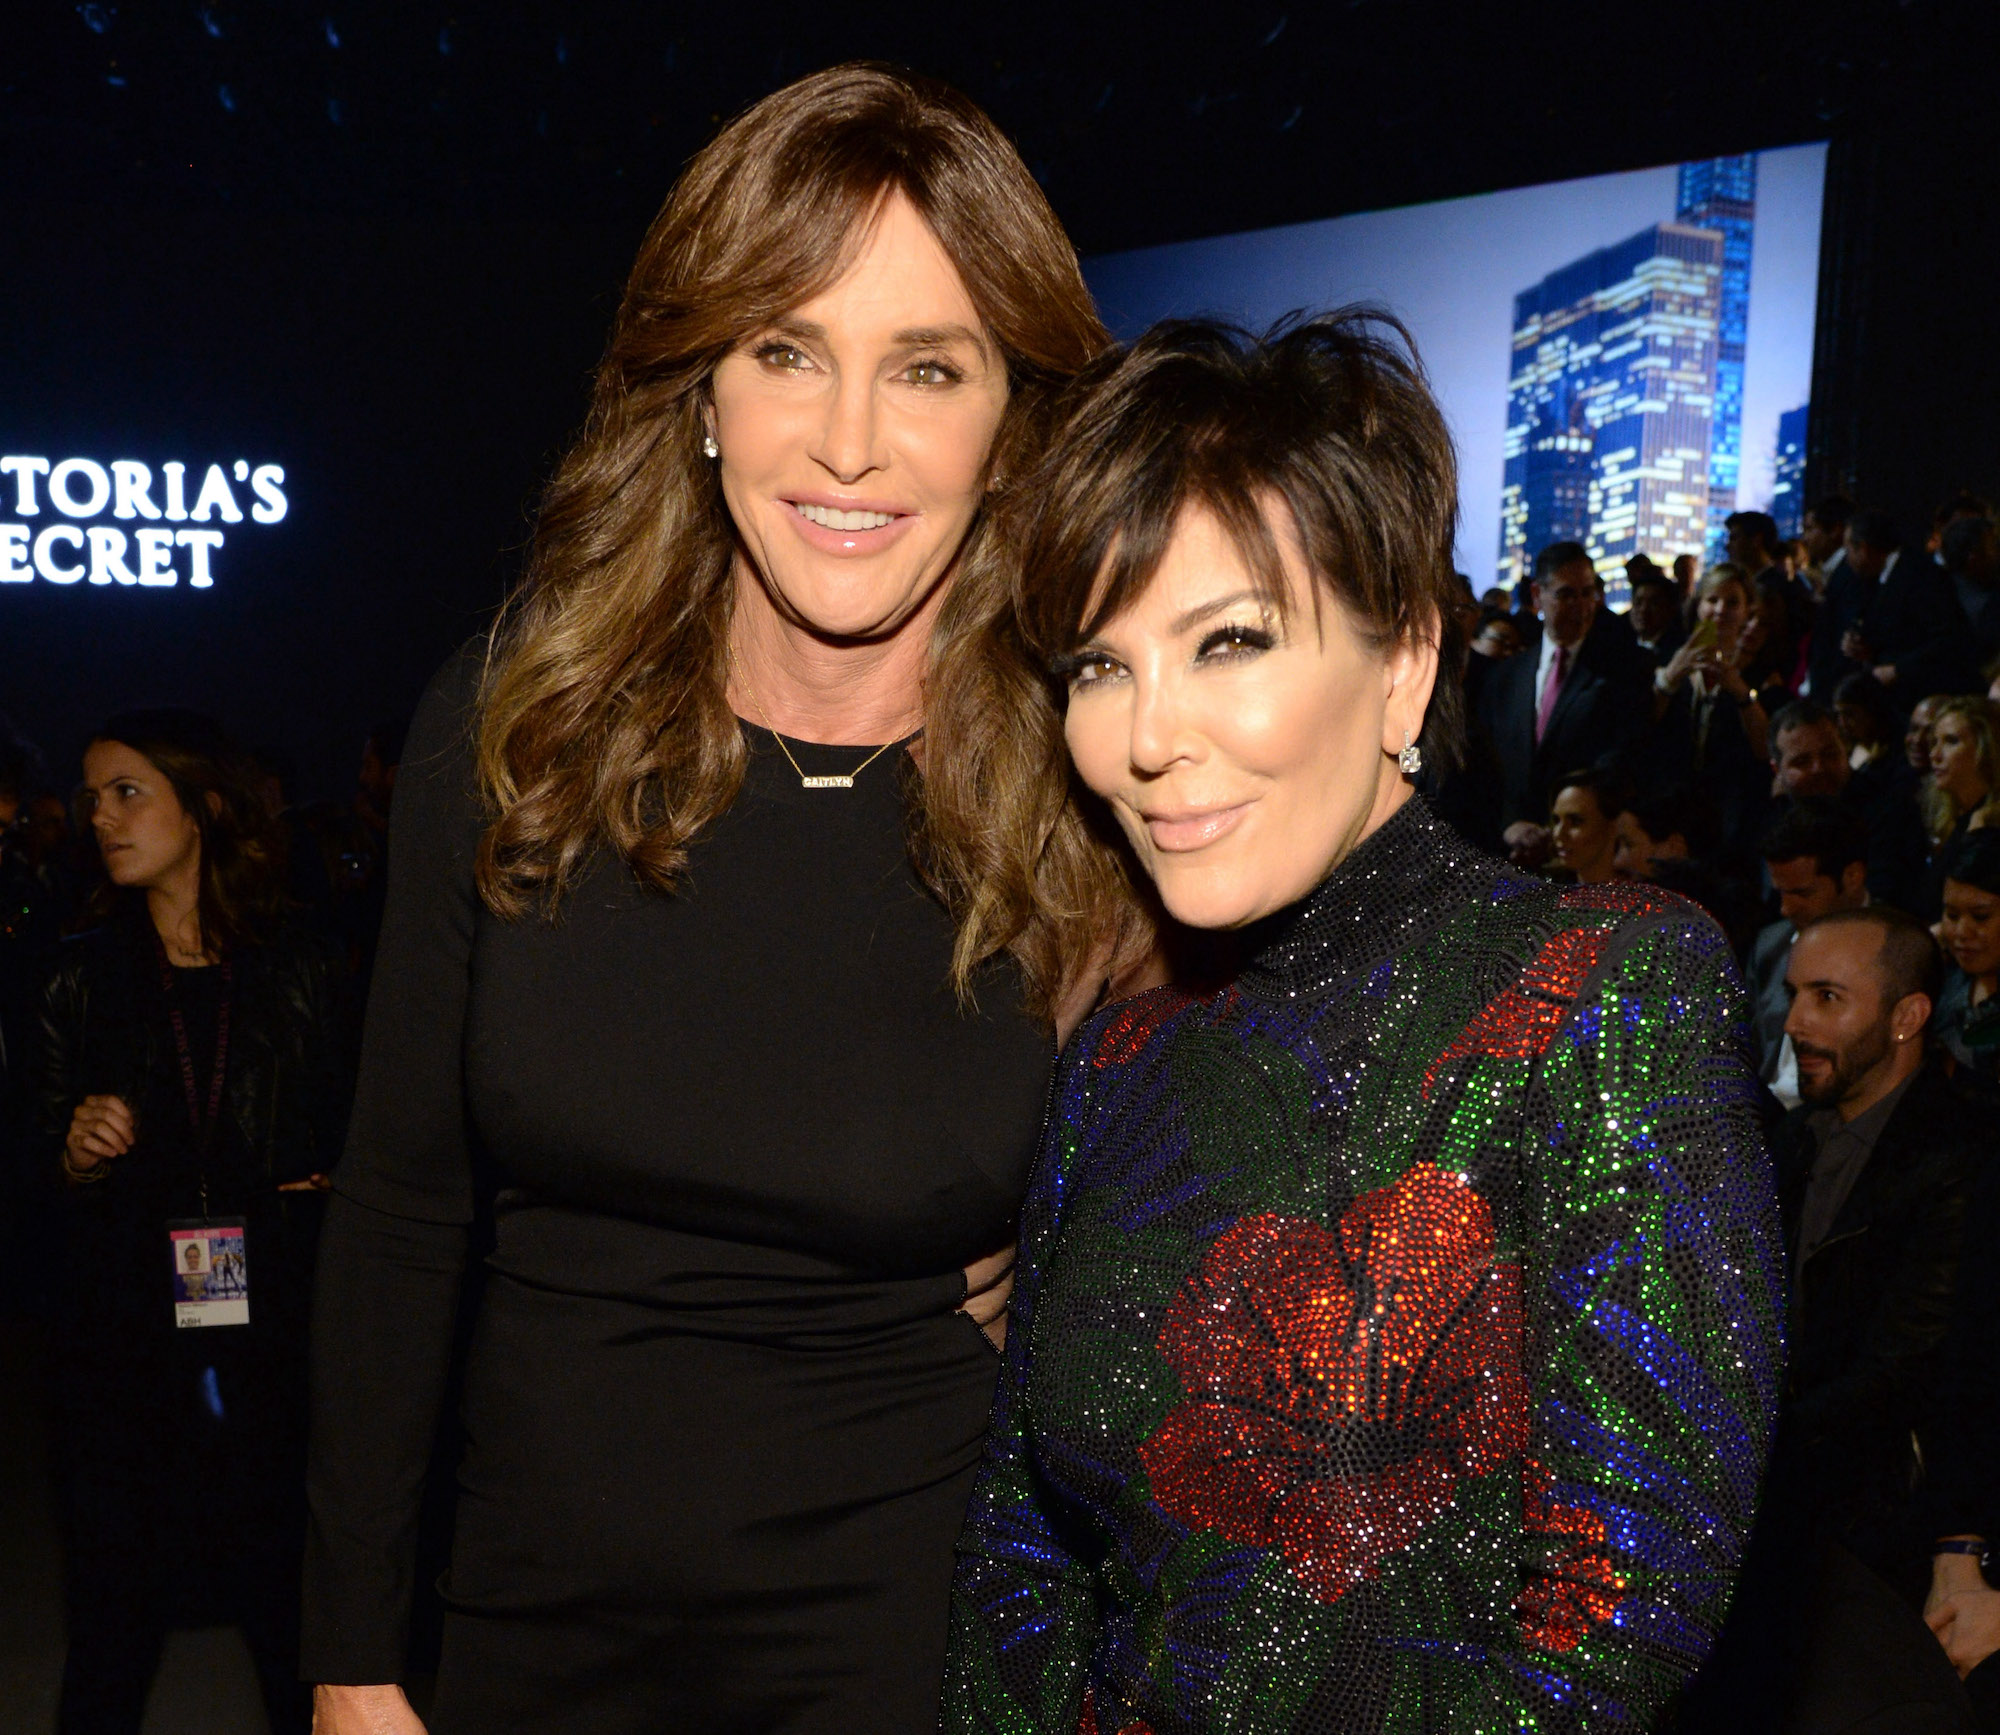 Are Kris Jenner and Caitlyn Jenner Friends?